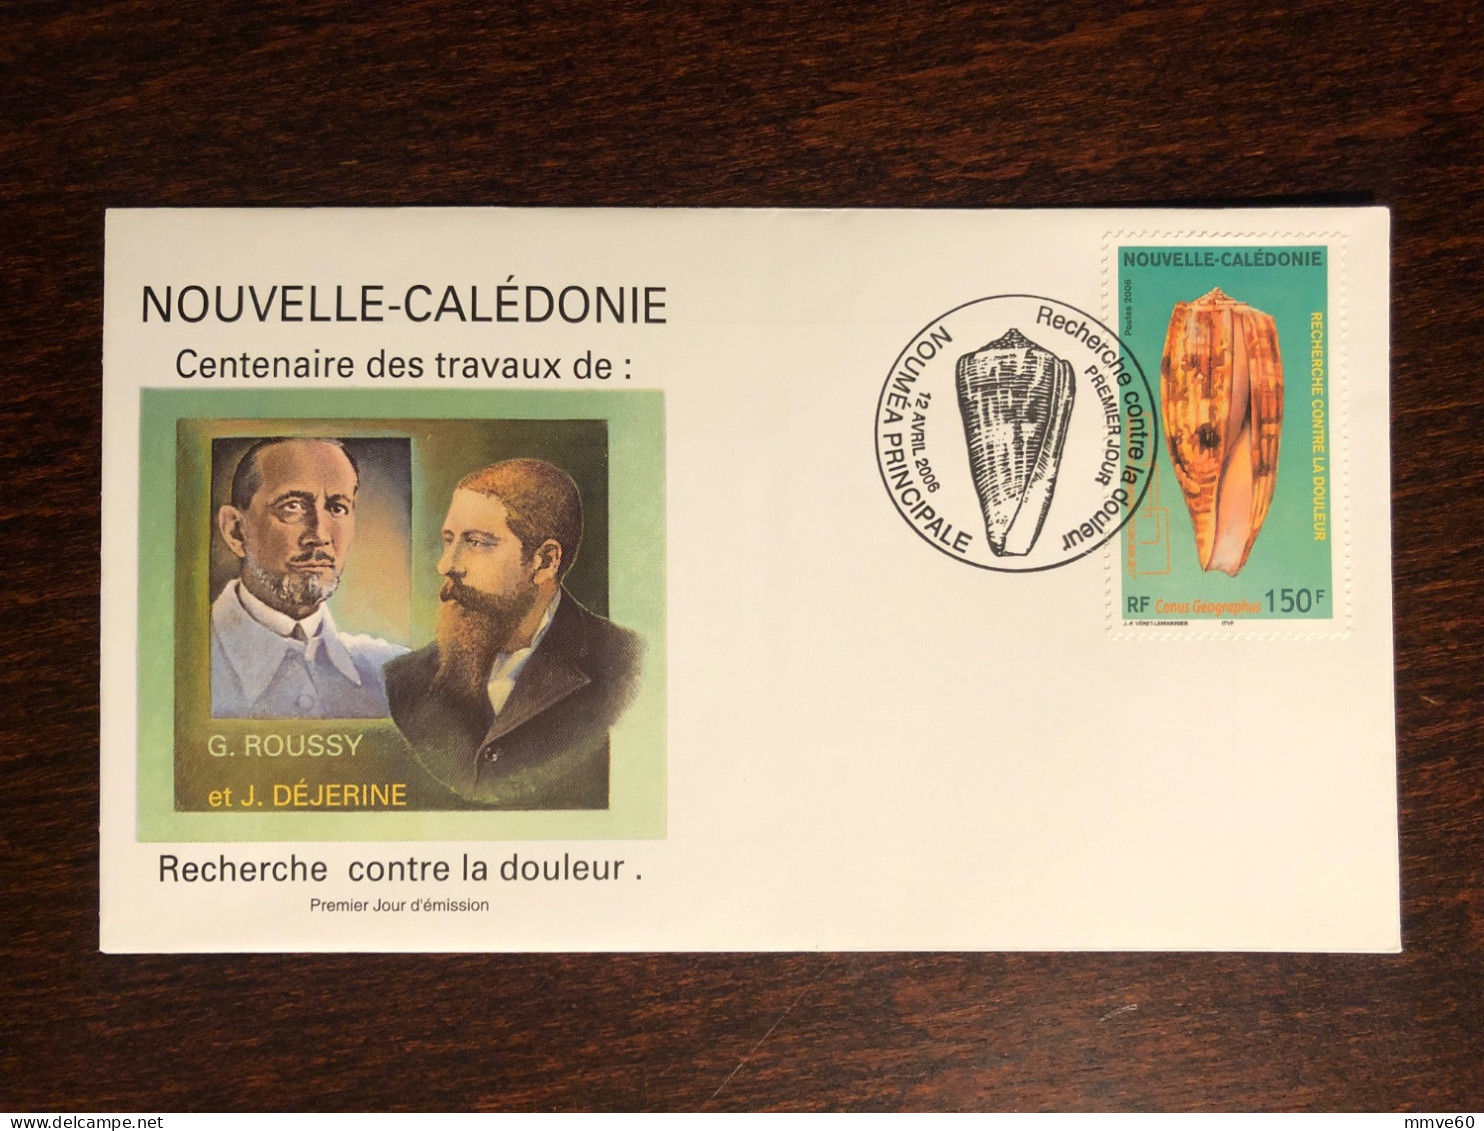 NEW CALEDONIA NOUVELLE CALEDONIE FDC COVER 2006 YEAR PAIN RESEARCH NEUROLOGY HEALTH MEDICINE - Covers & Documents